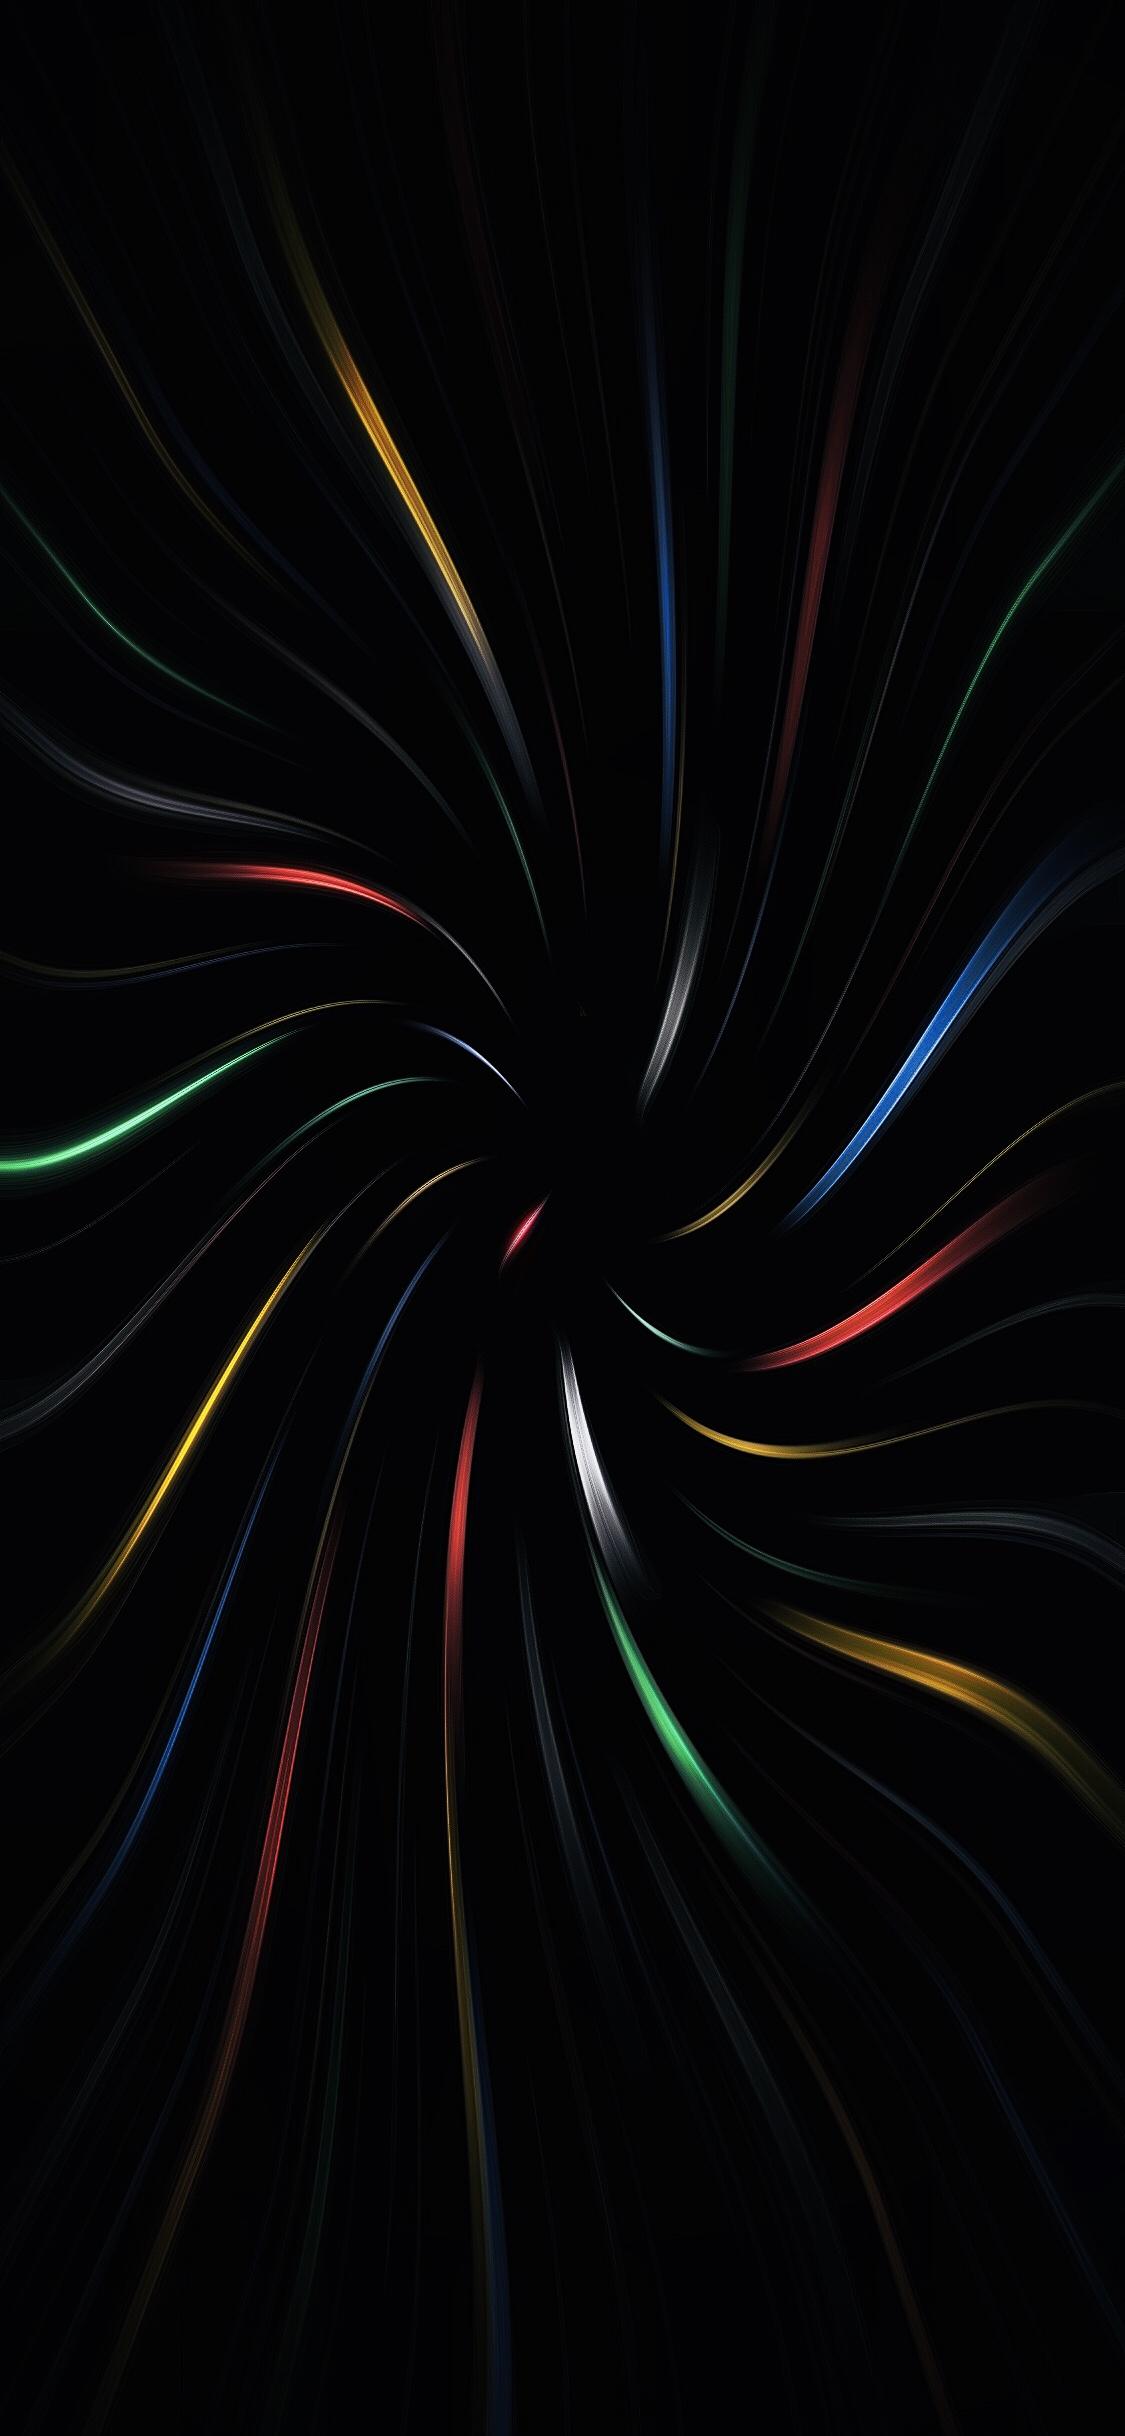 Abstract wallpapers: vivid contrasting colors [pack 3]